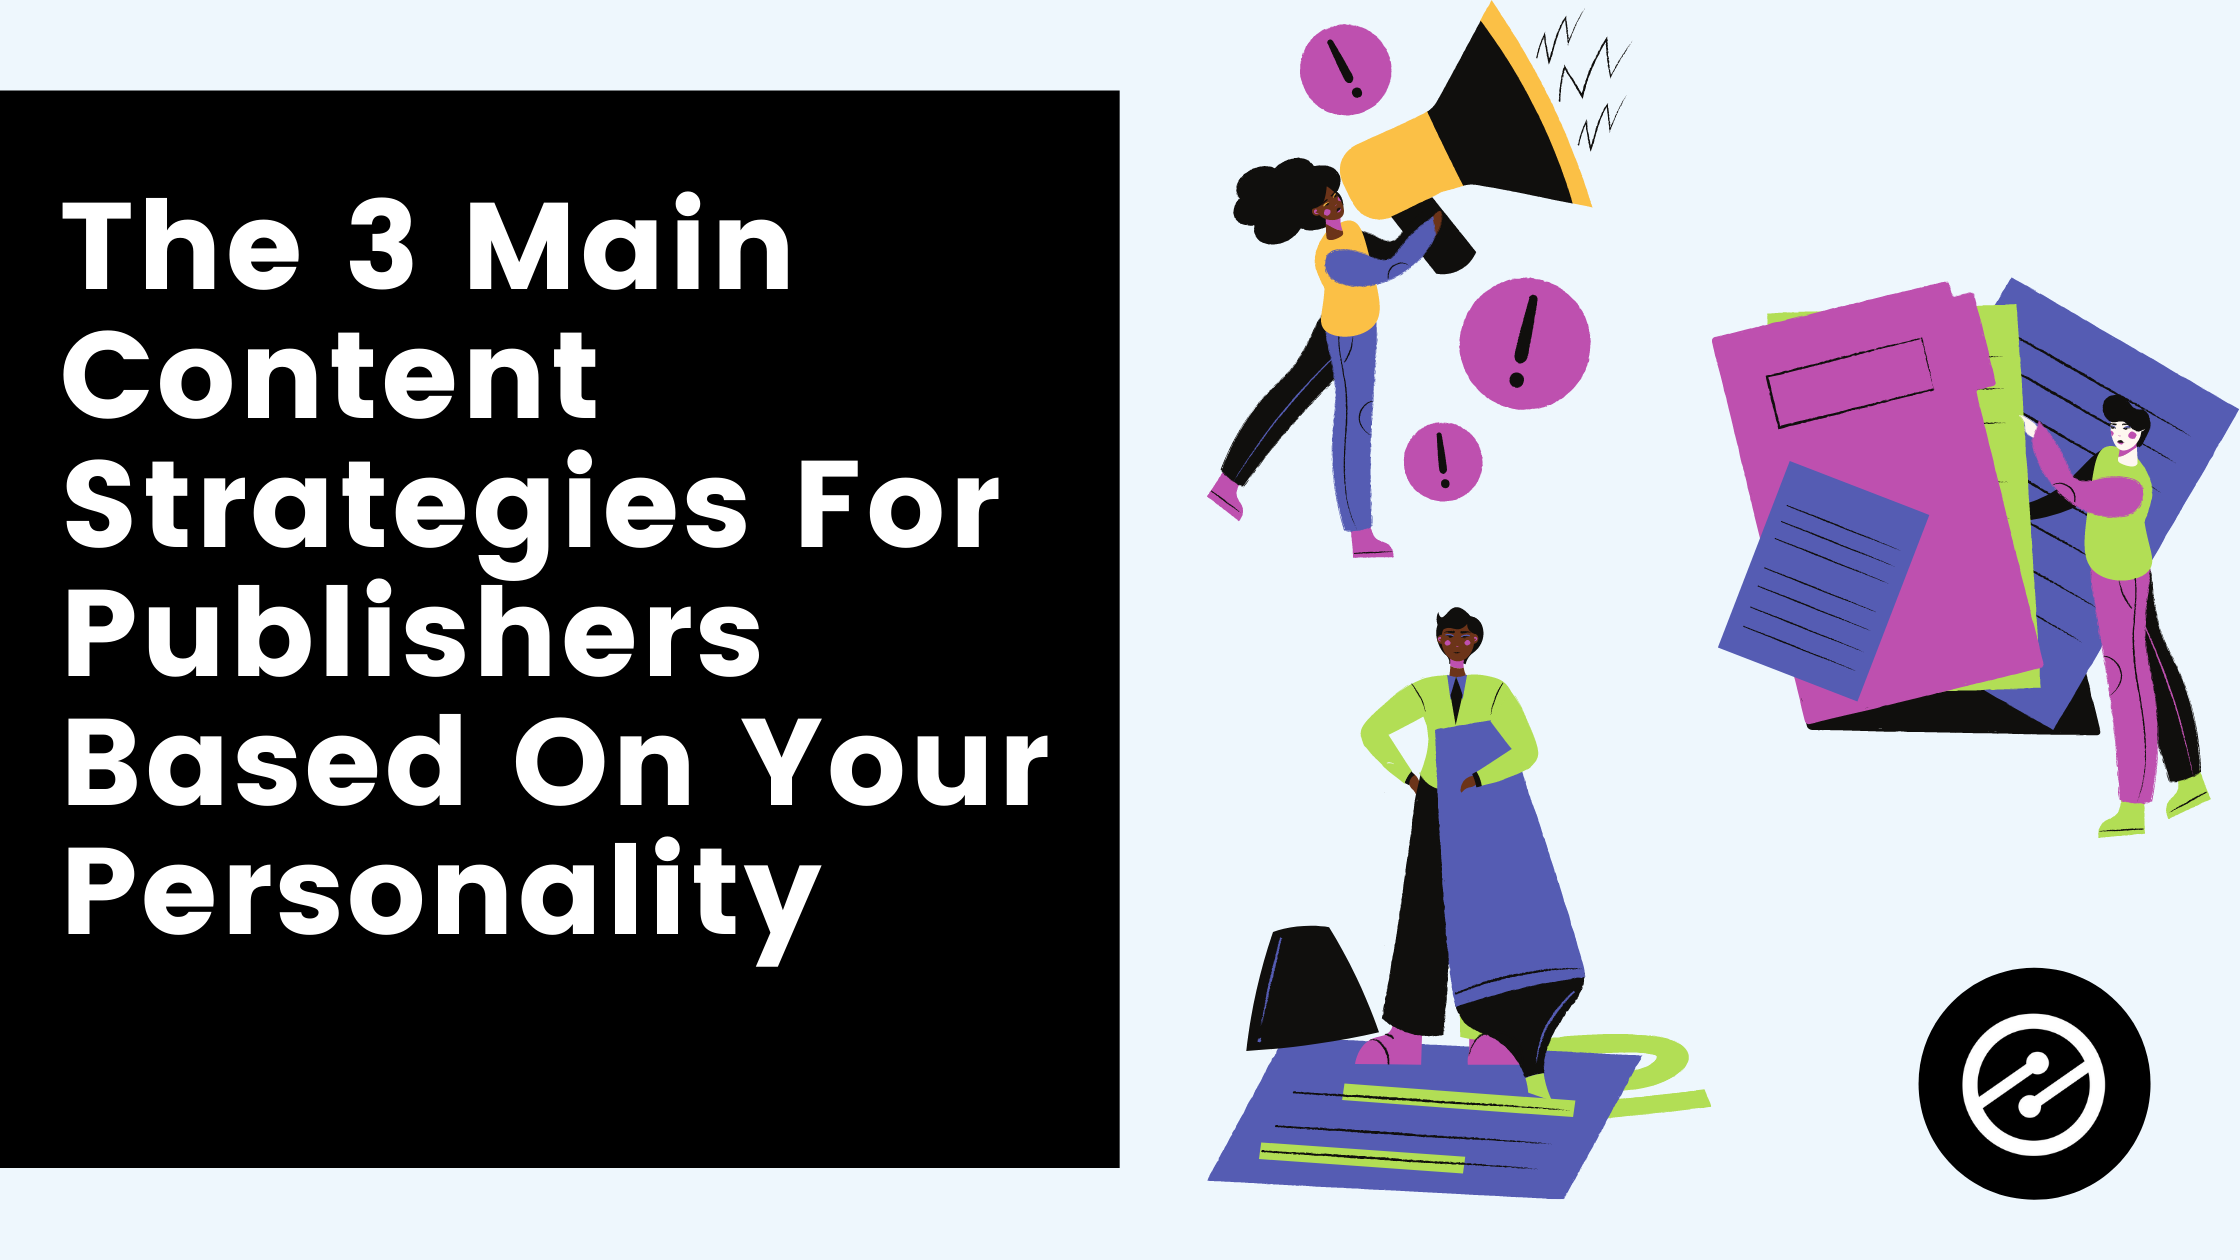 The 3 Main Content Strategies For Publishers Based On Your Personality